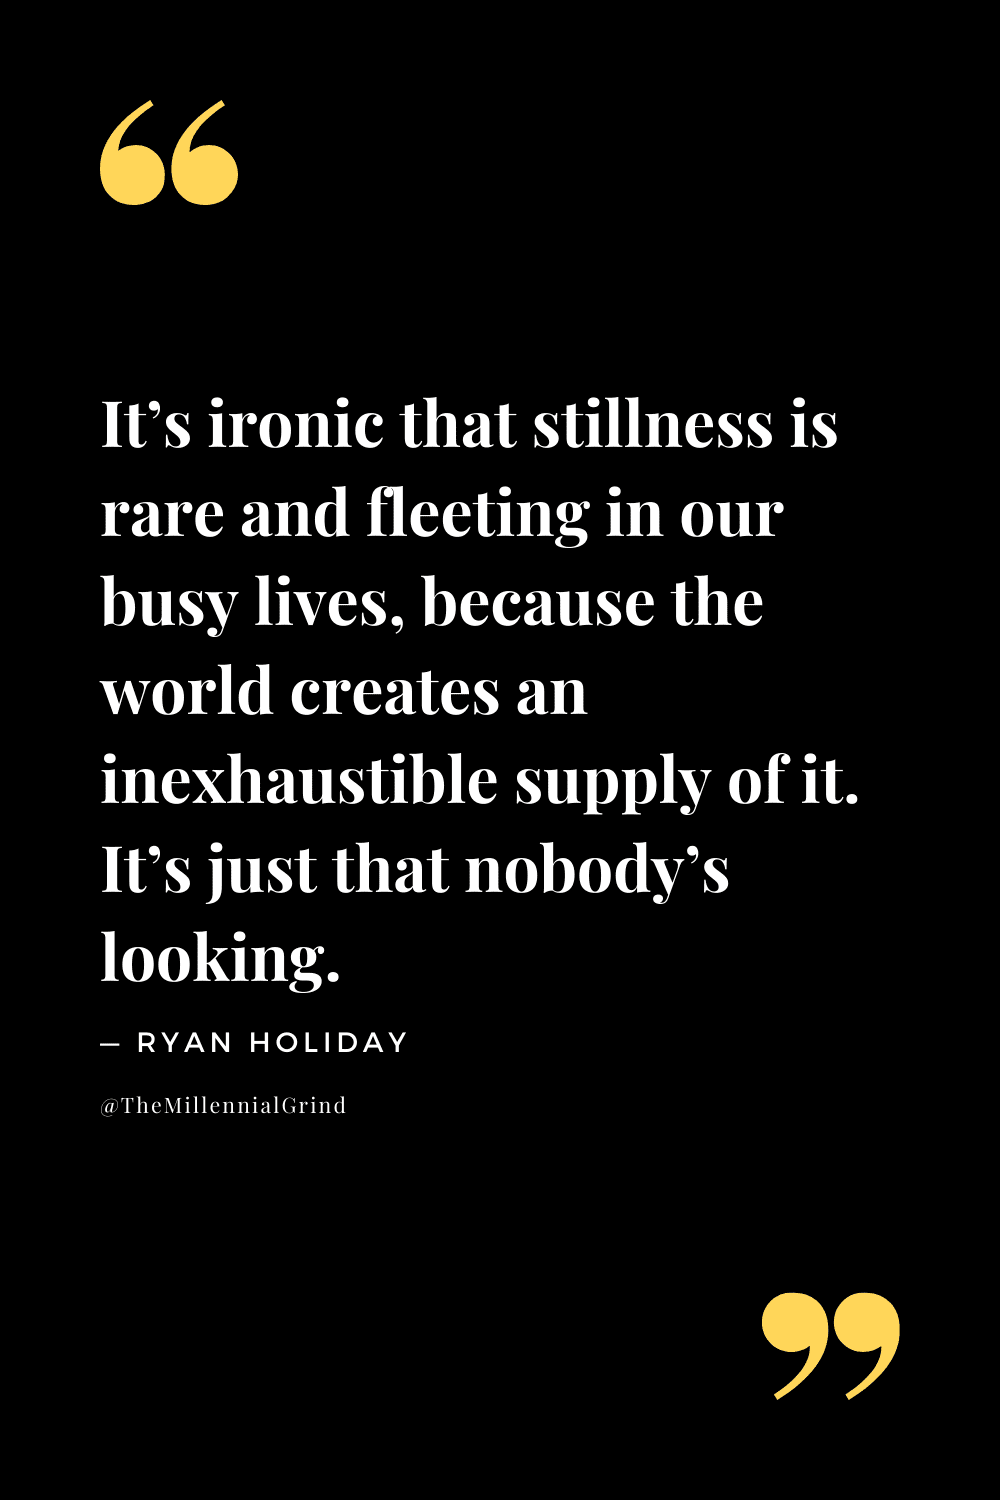 Quotes from Stillness Is The Key by Ryan Holiday